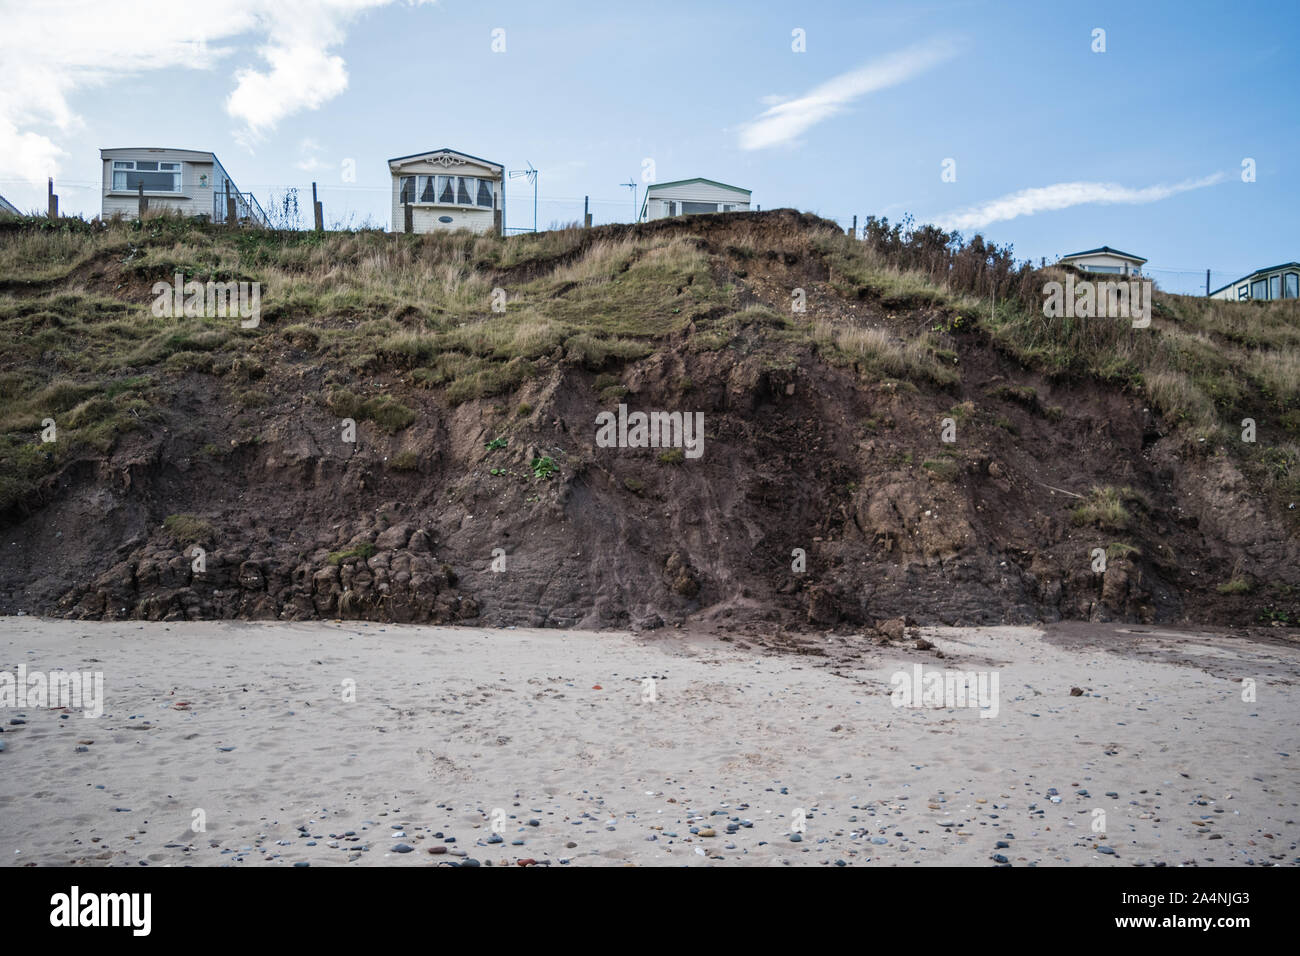 Effects of coastal erosion in Hornsea, in the East Riding of Yorkshire, showing holiday caravans close to areas of landslip from boulder clay. Stock Photo